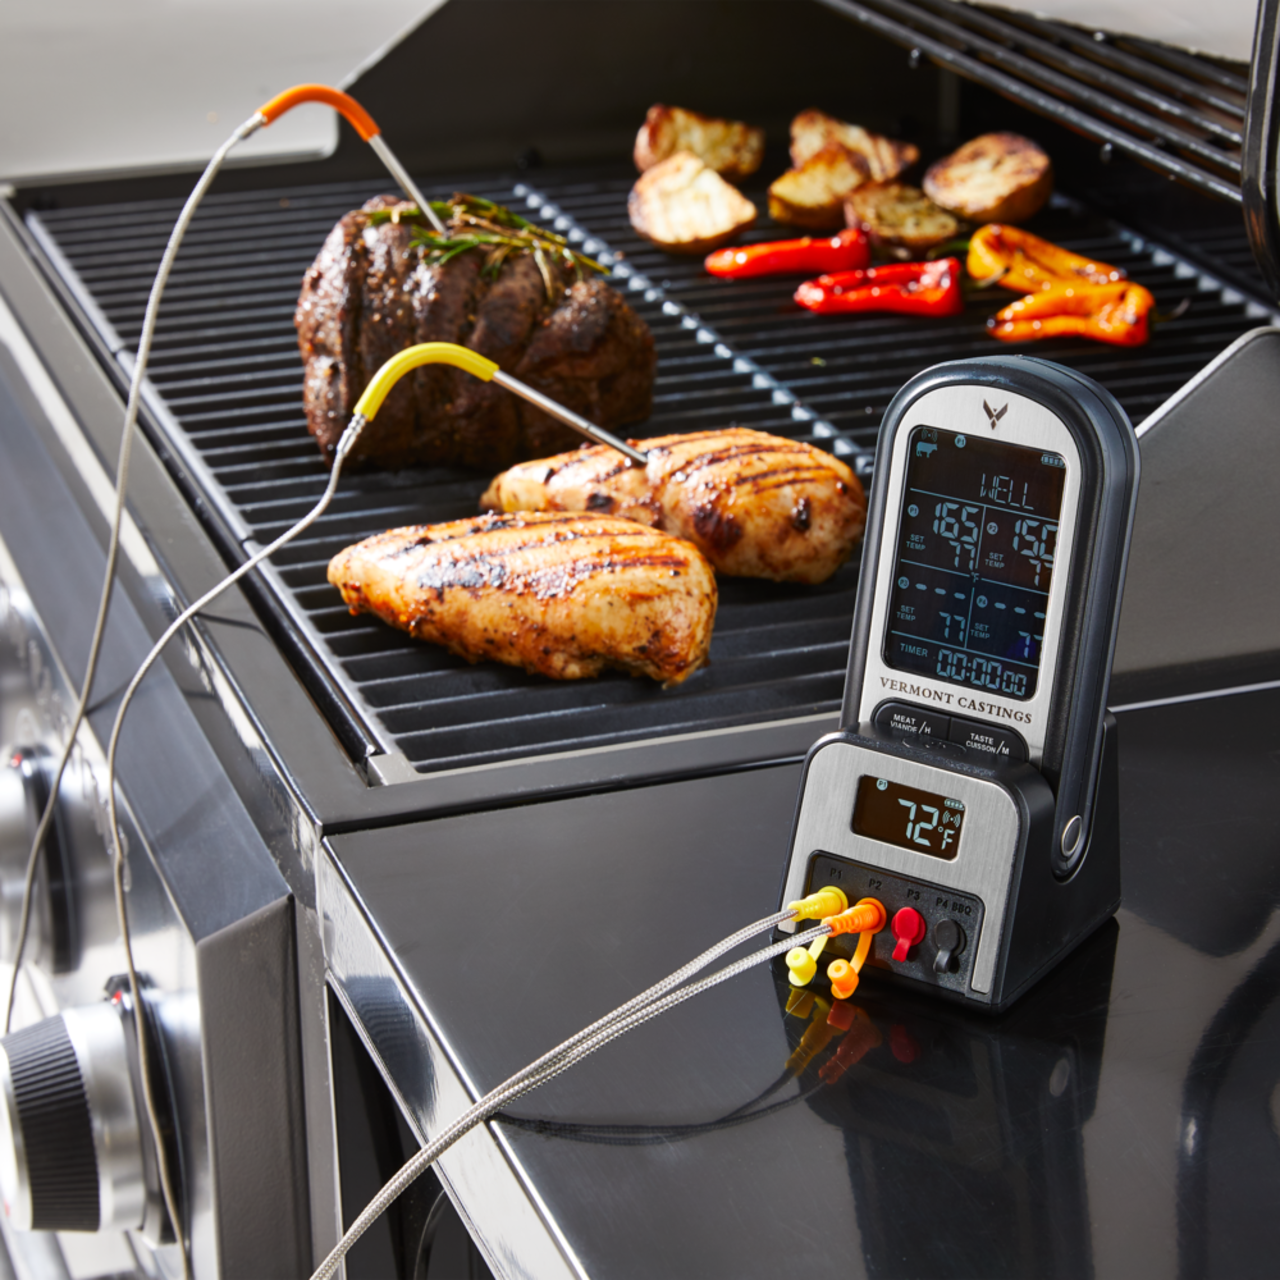 Vermont Castings Wireless Digital BBQ Food & Meat Thermometer